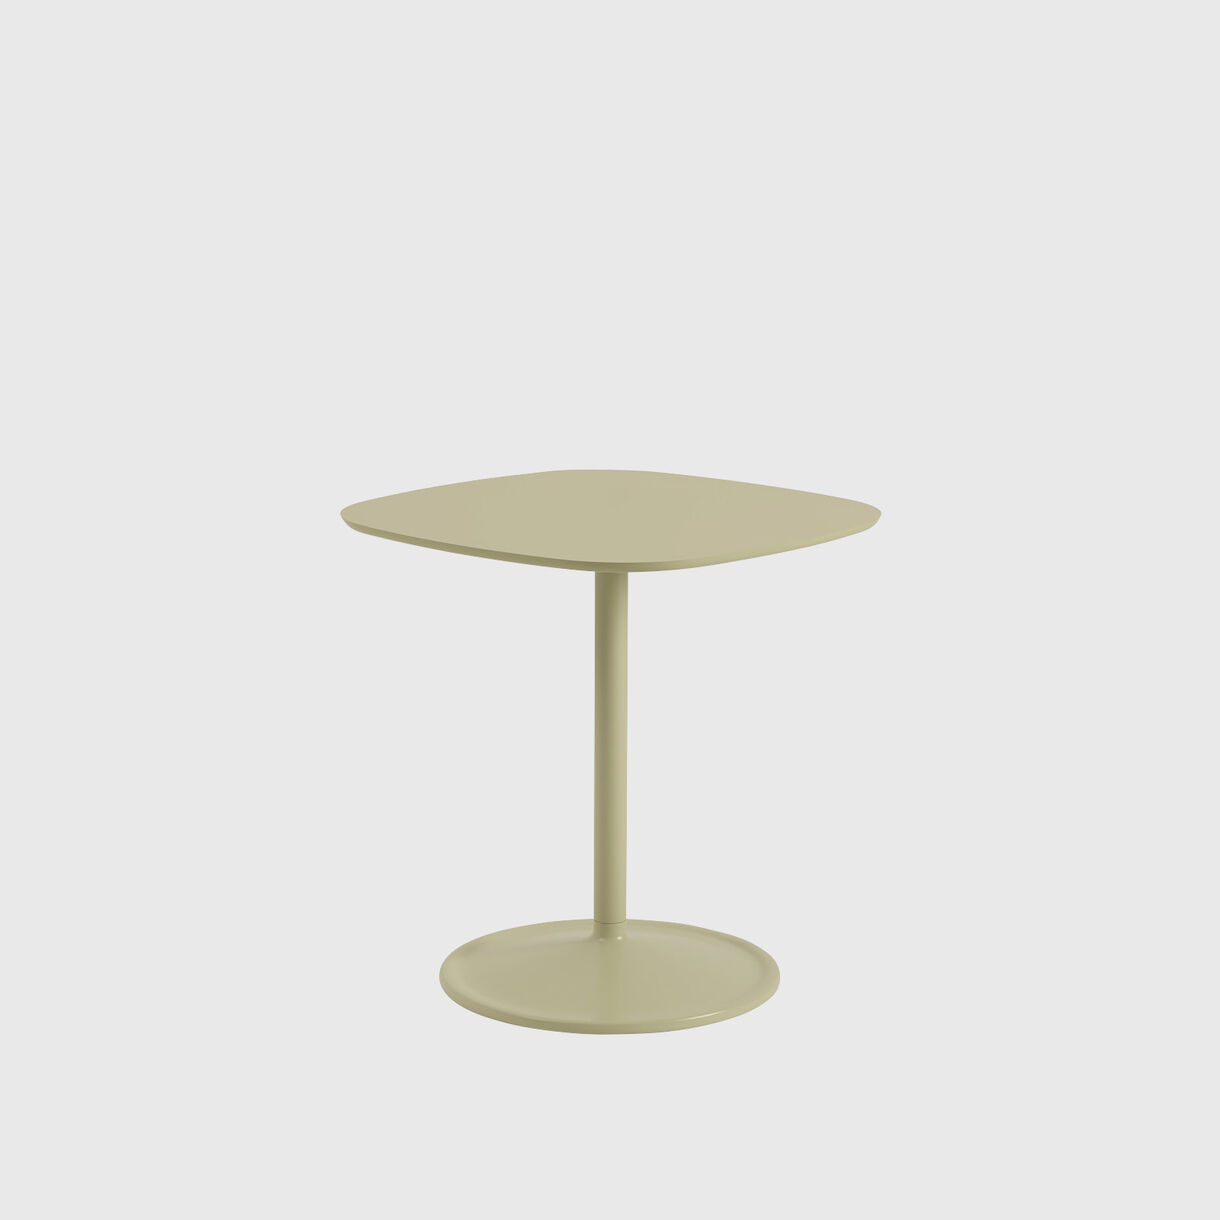 Soft Cafe Table, 70 x 73, Beige Green